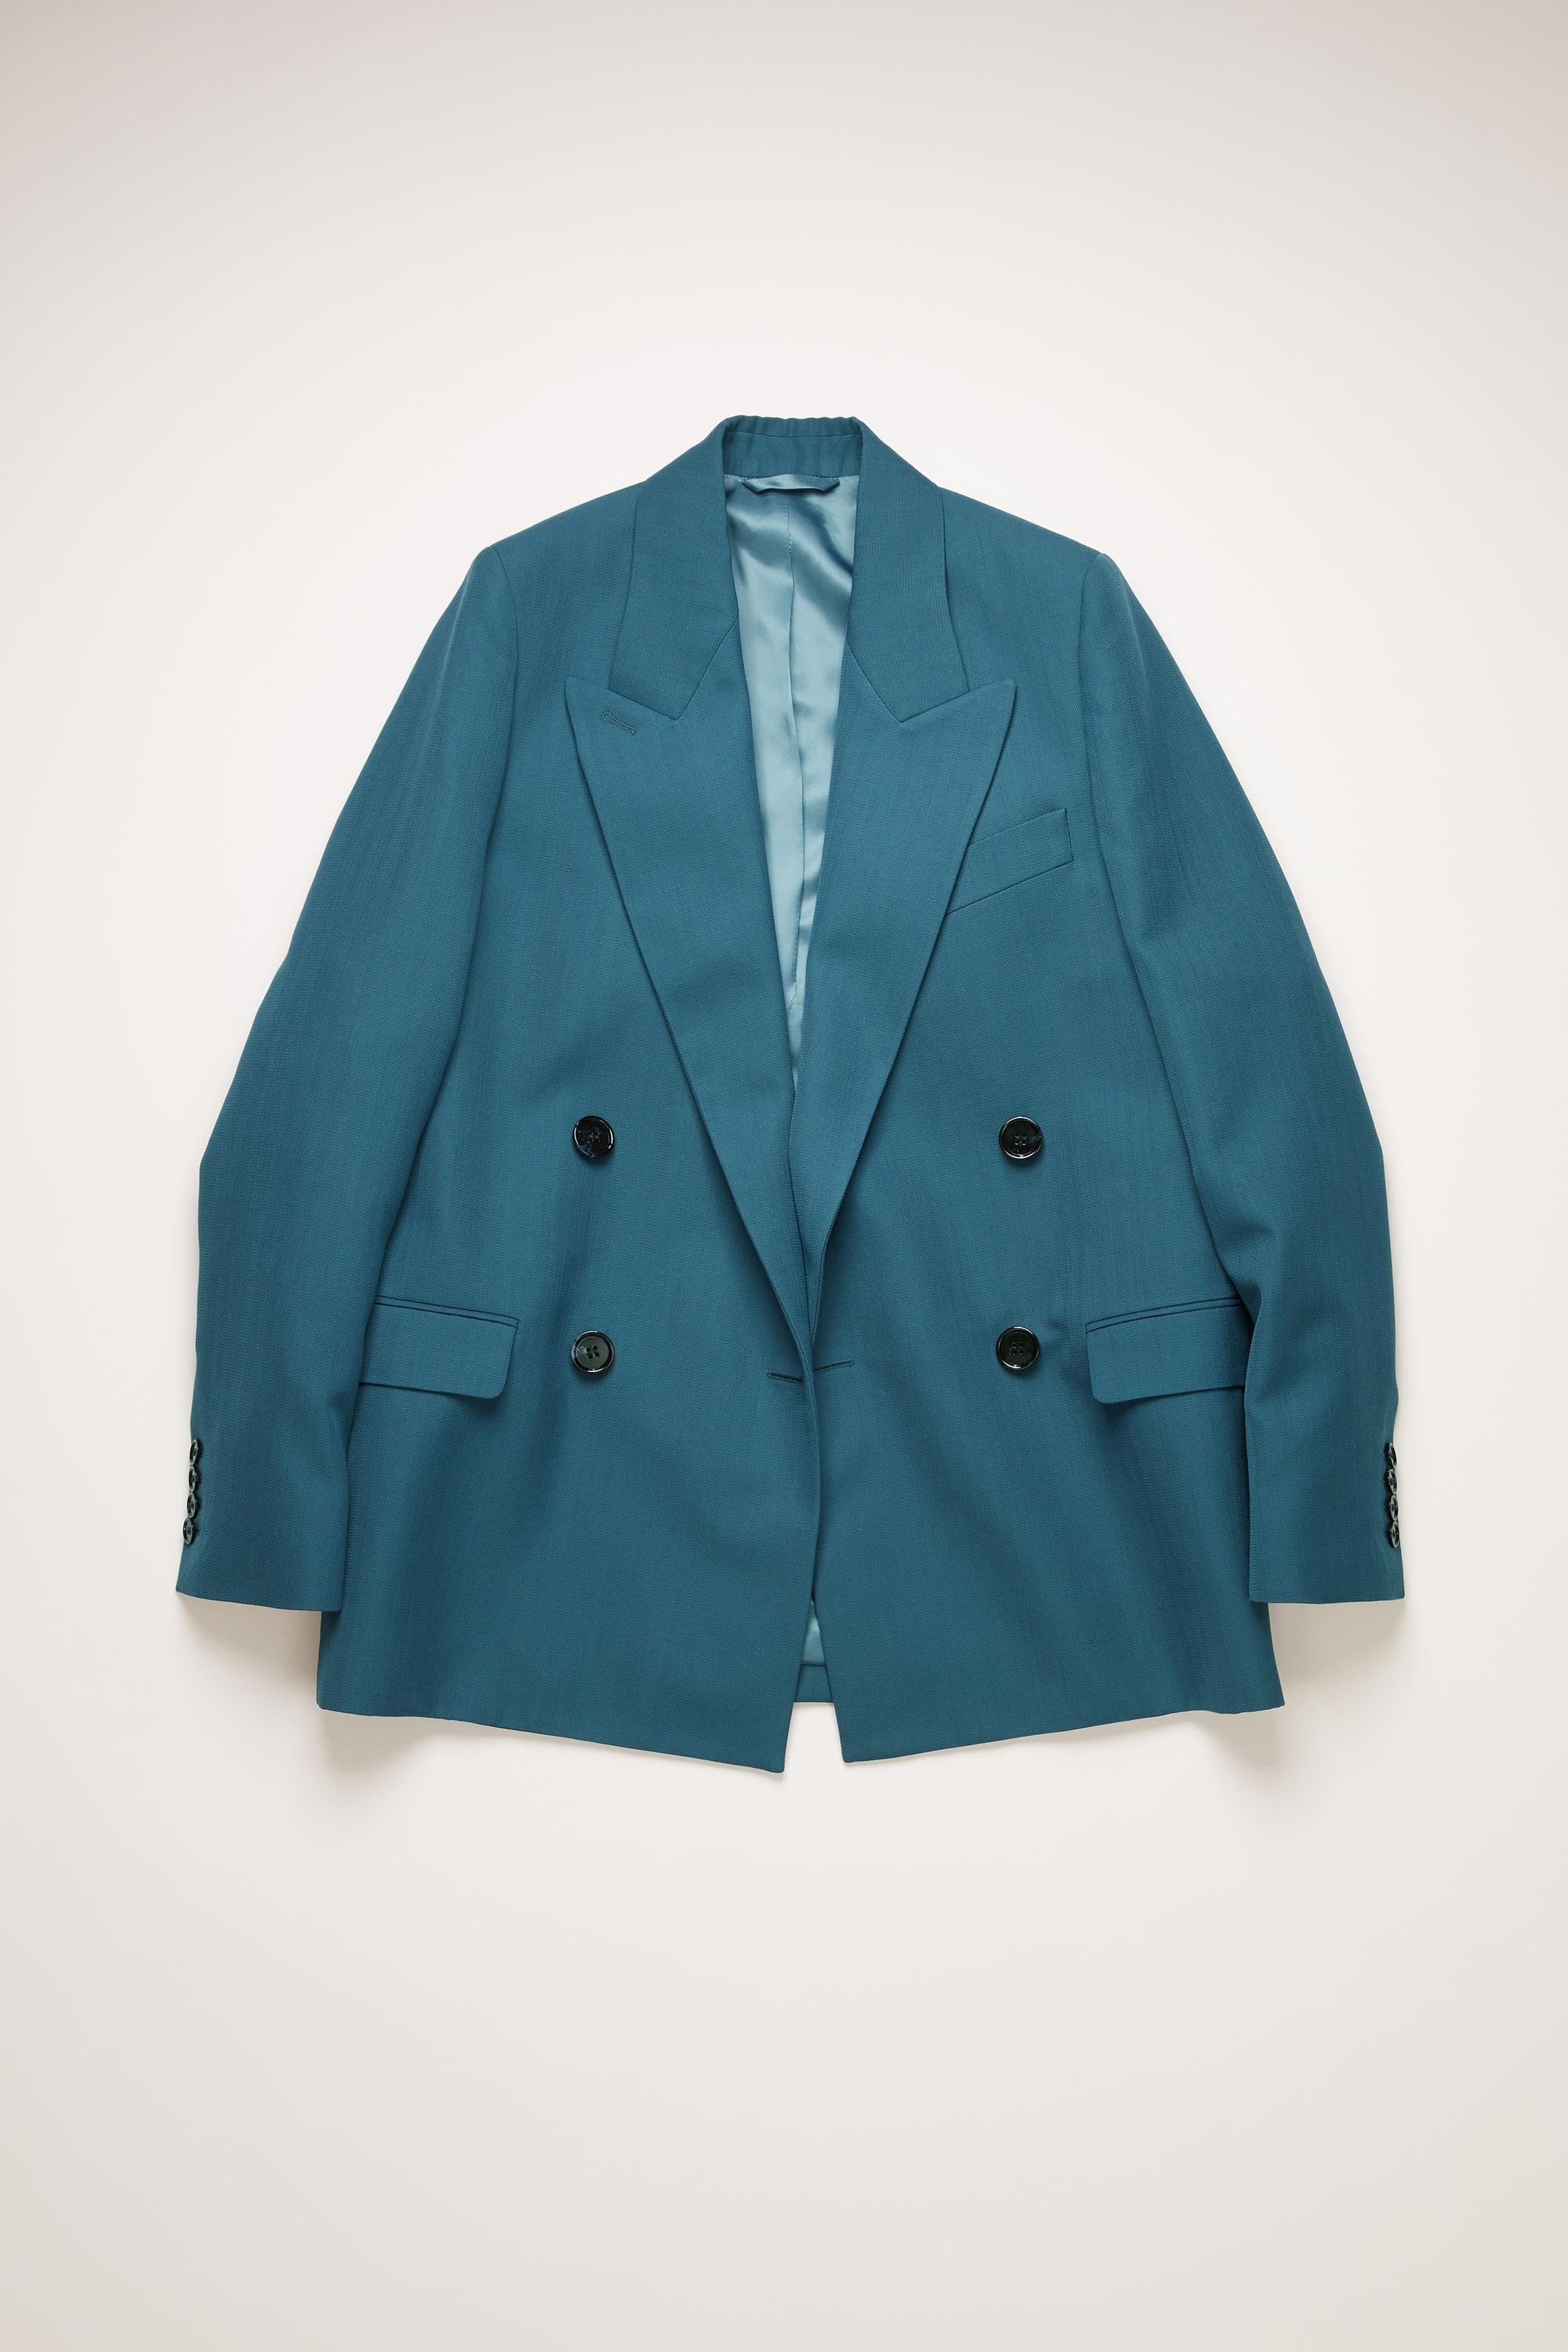 Acne Studios Wool Fn-wn-suit000175 Teal Blue Double-breasted Suit Jacket |  Lyst